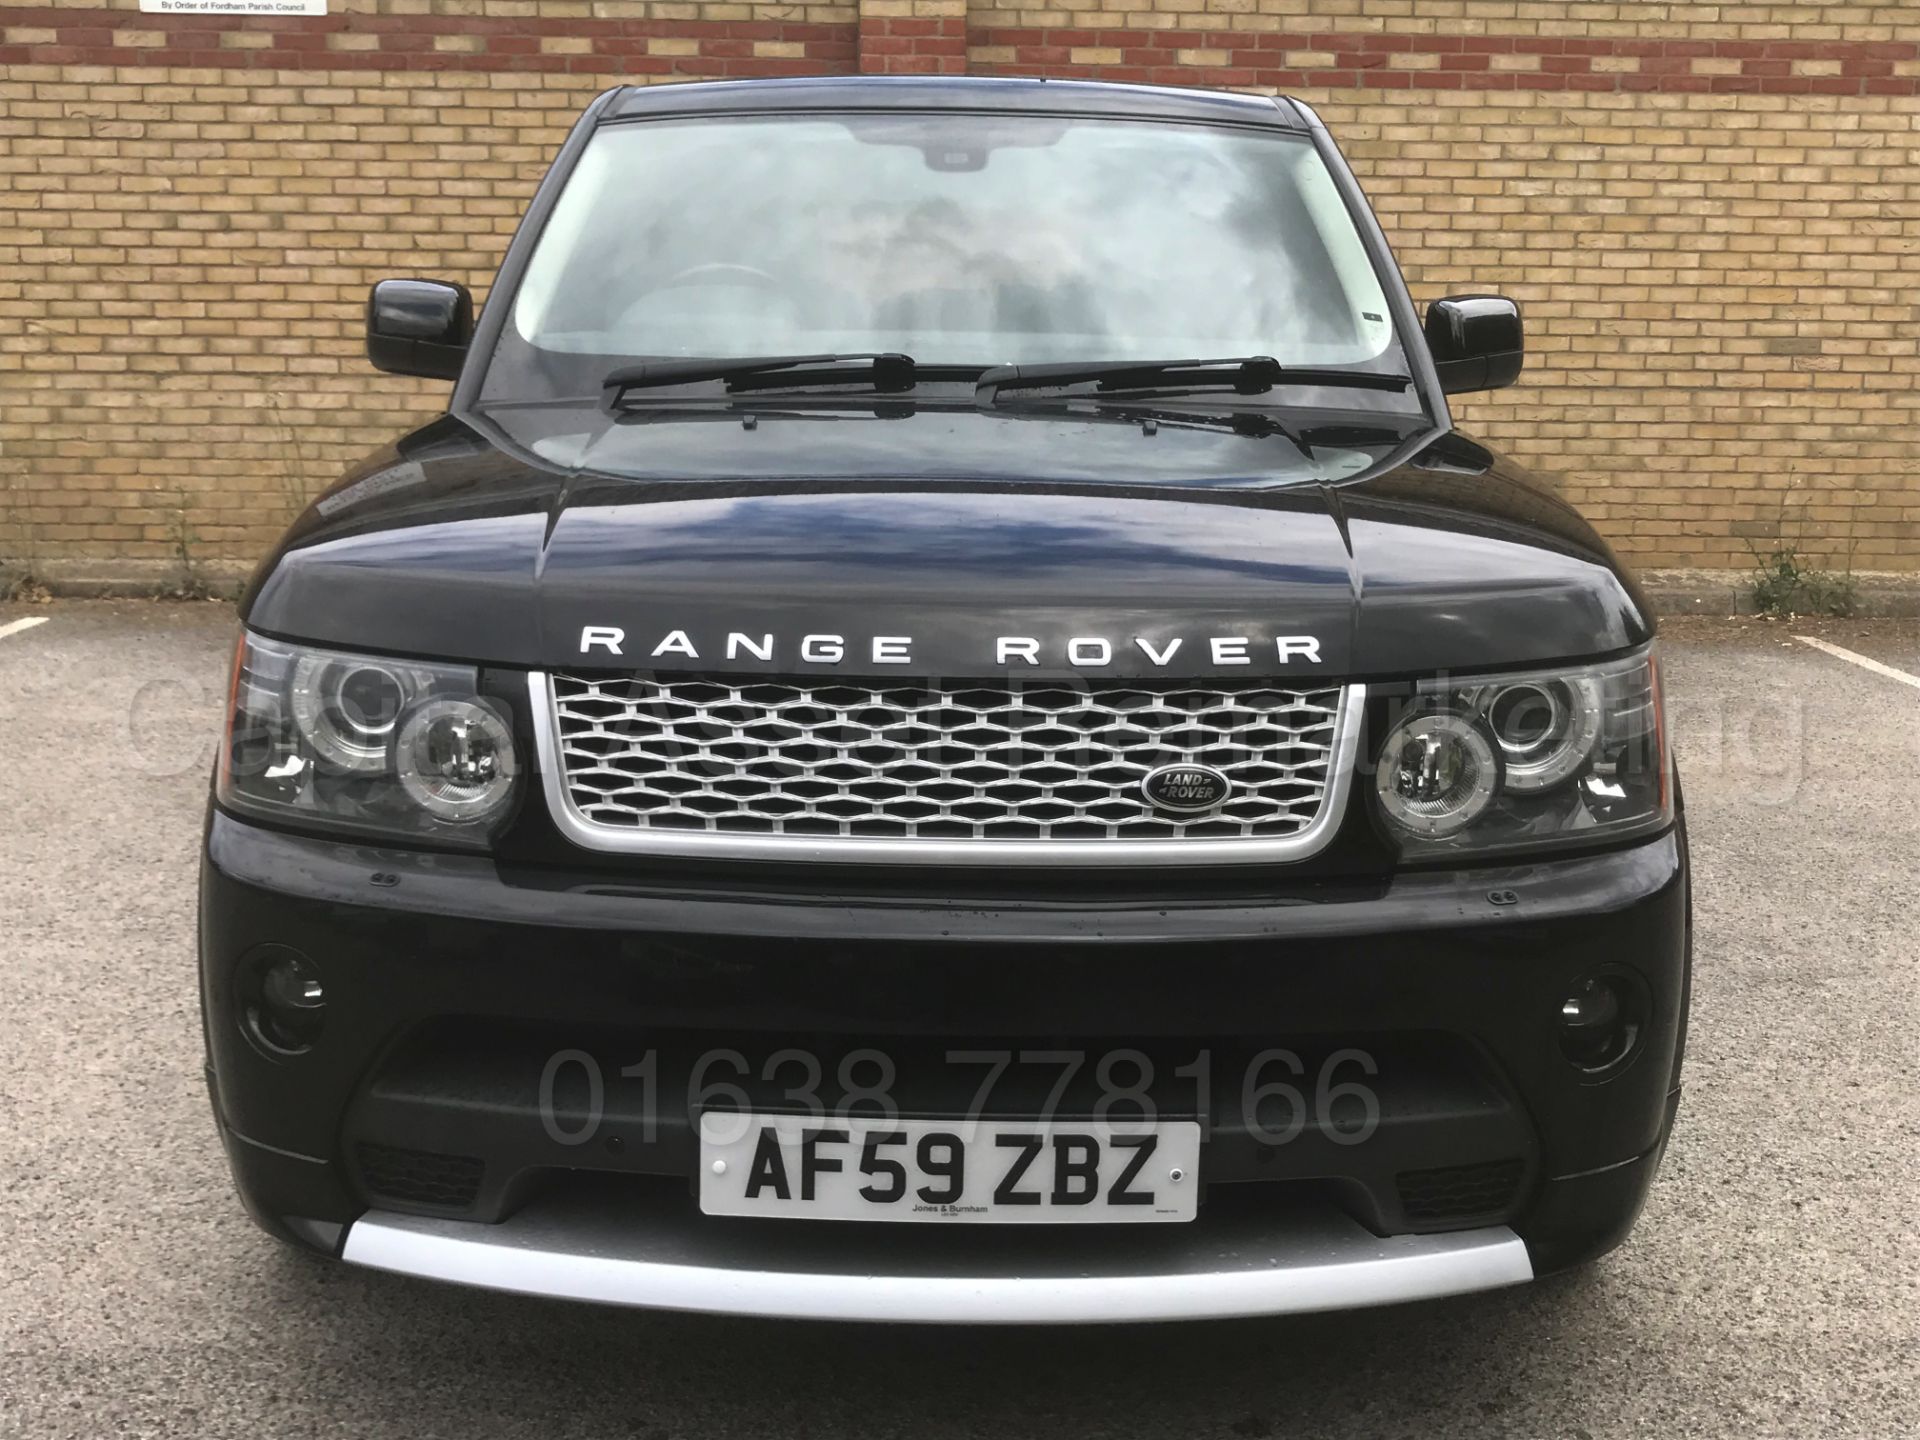 (On Sale) RANGE ROVER SPORT *HSE EDITION* (2010 MODEL) '3.0 TDV6 - 245 BHP - AUTO' **FULLY LOADED** - Image 3 of 44